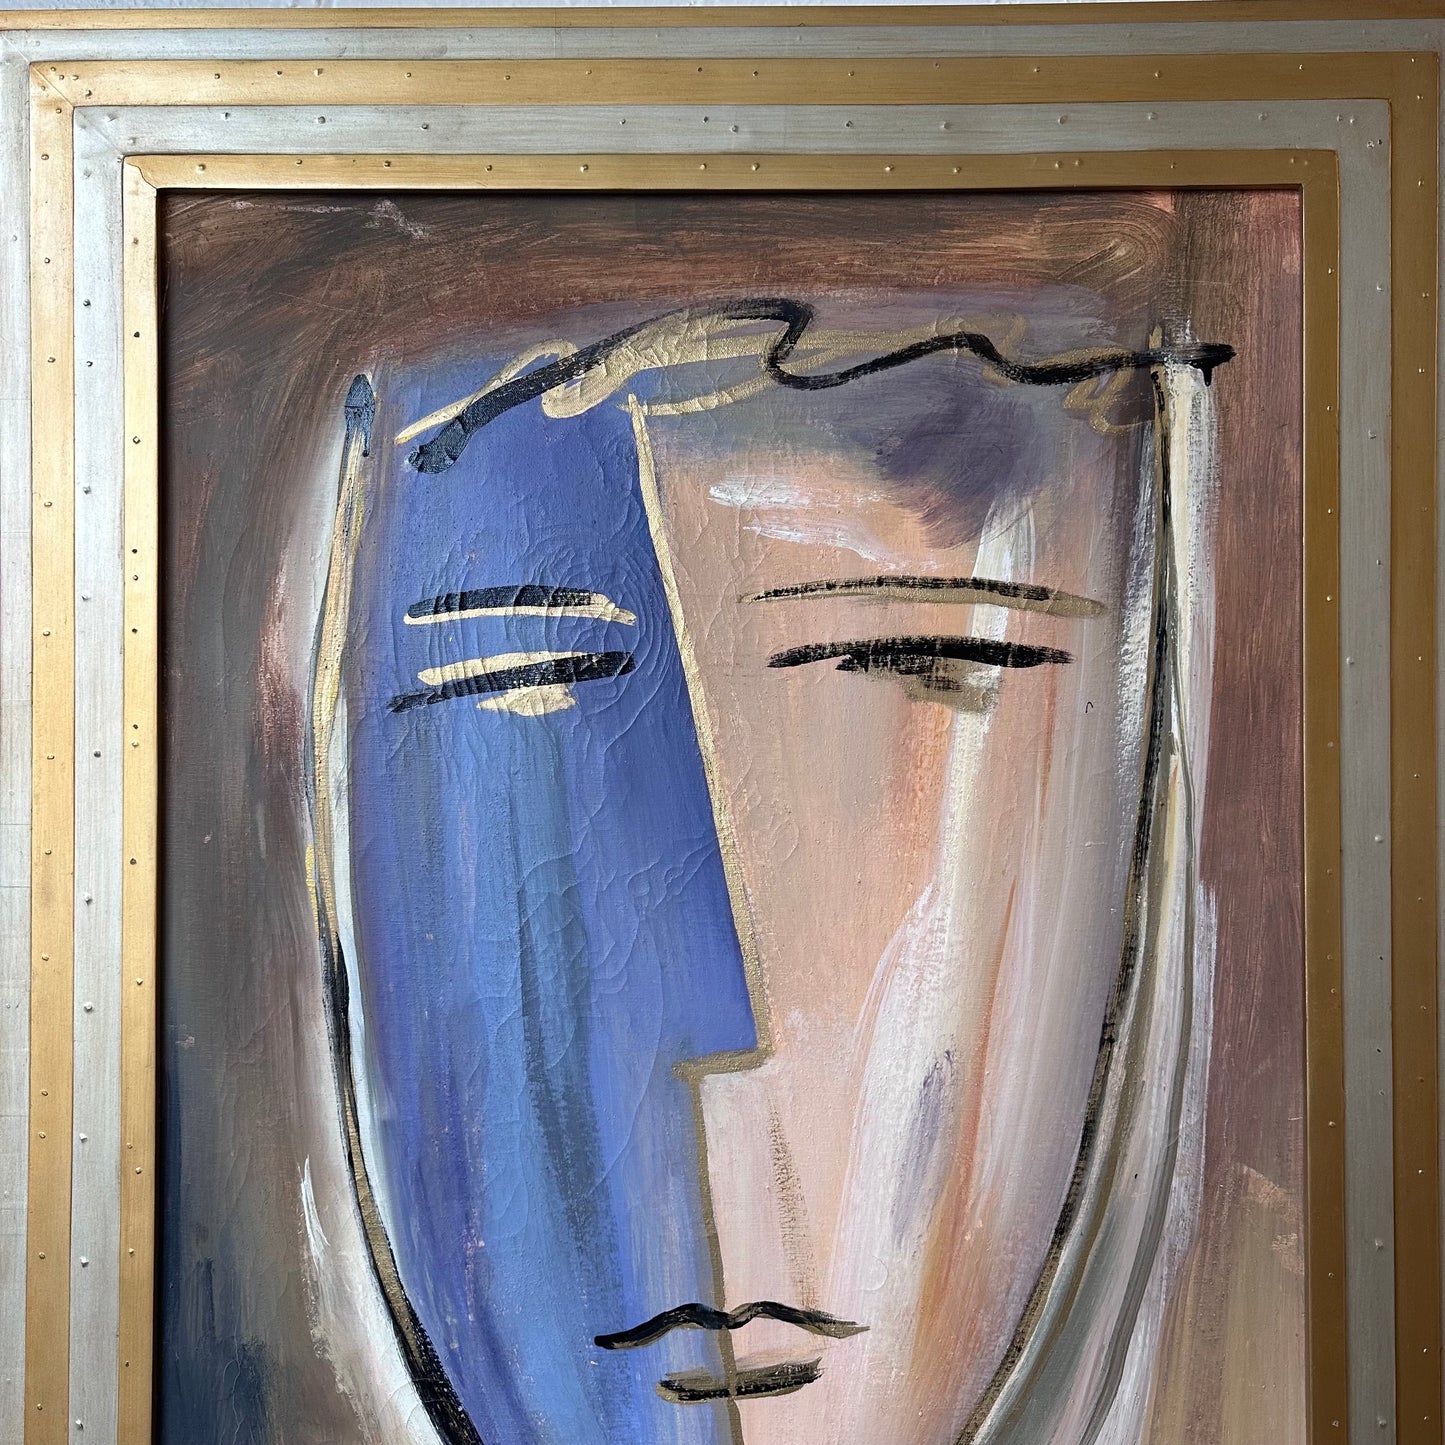 FRAMED AND SIGNED JAMES WARREN FIGURATIVE ACRYLIC ON CANVAS